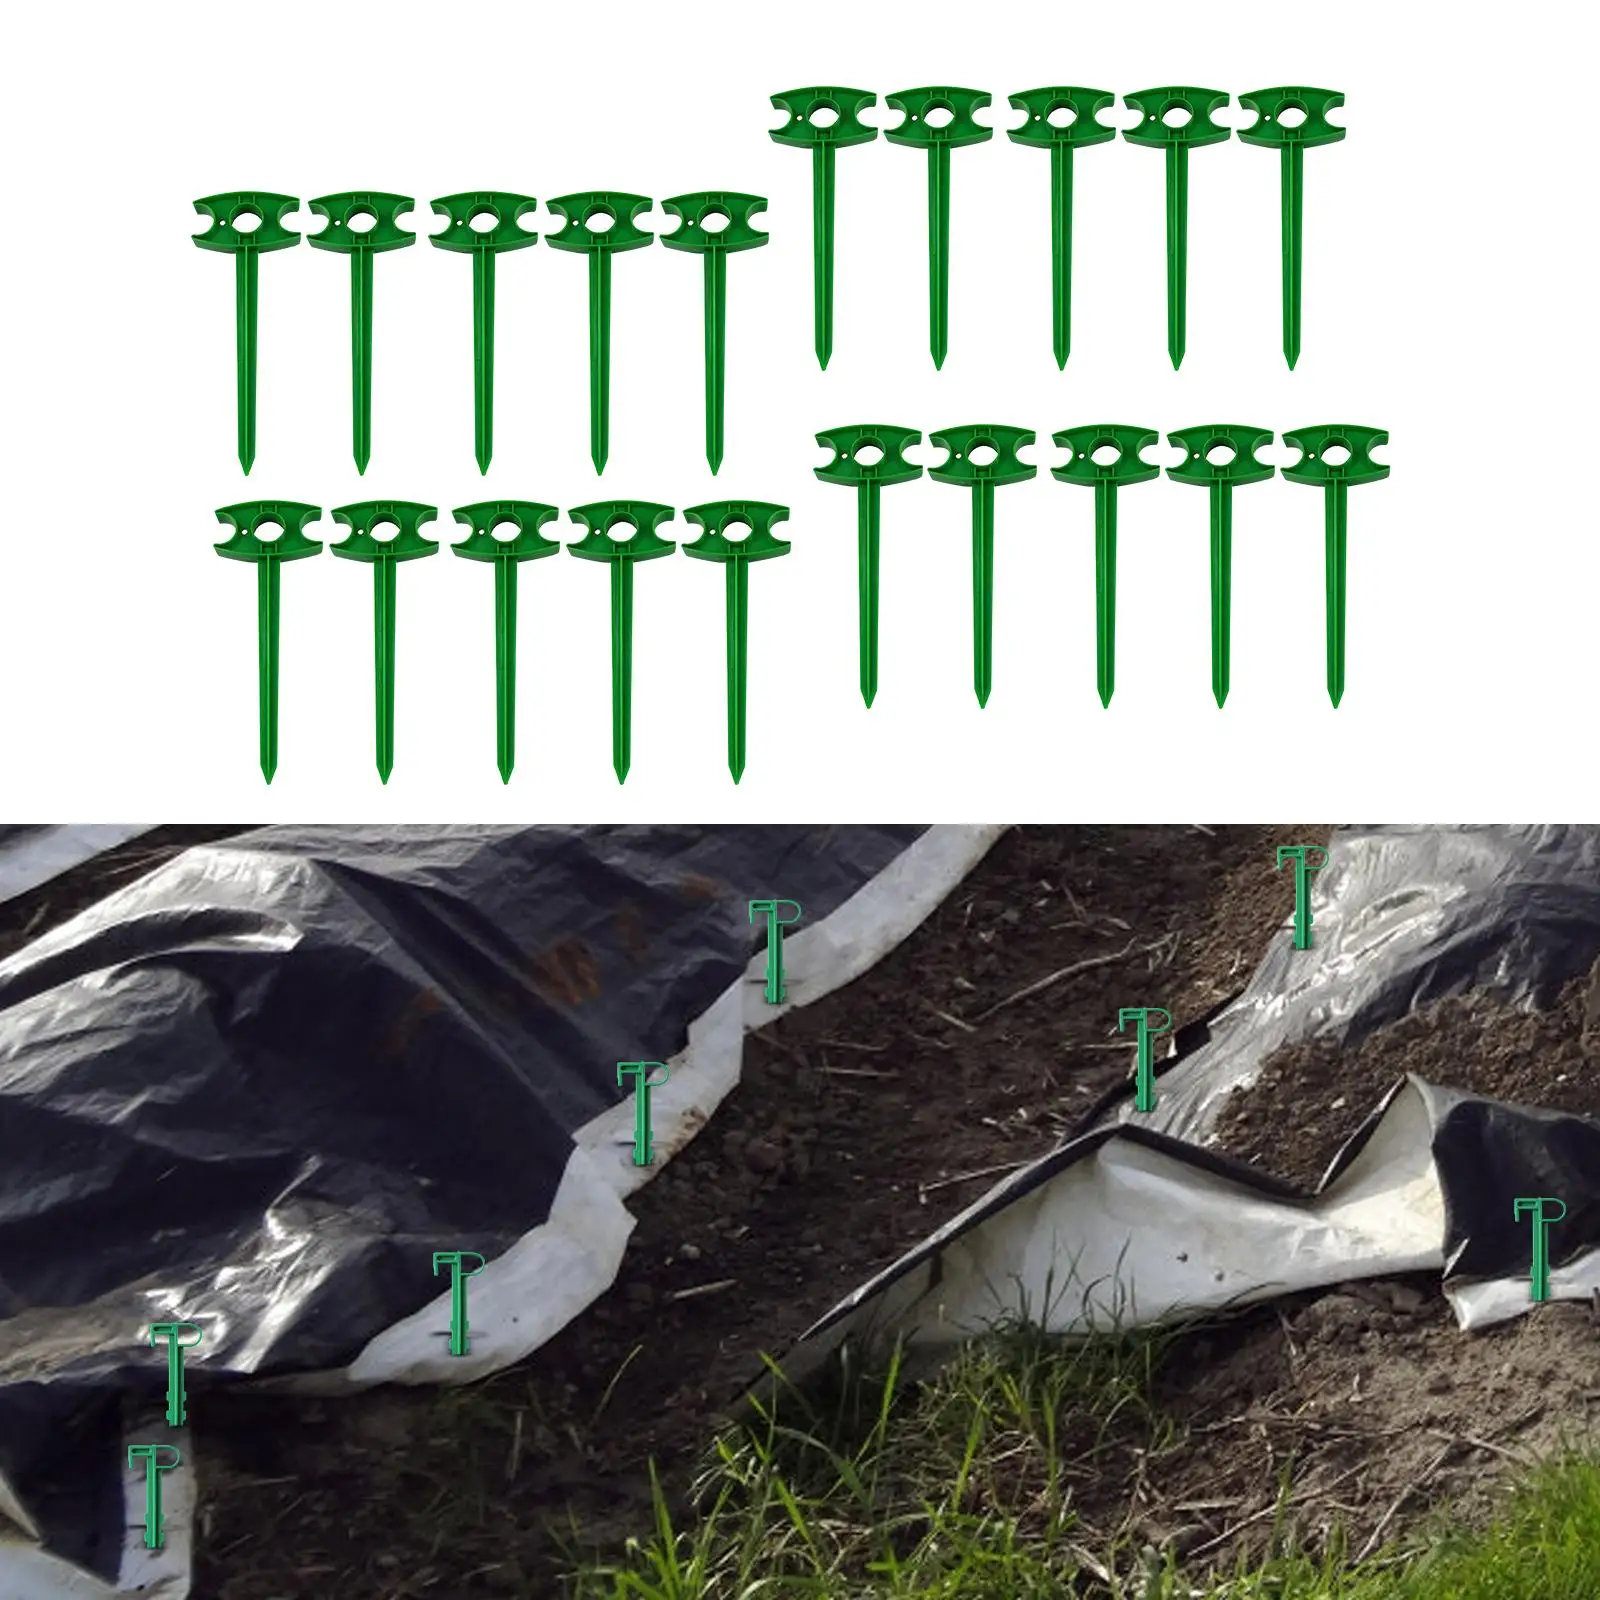 20x Landscape Stakes Durable Yard Garden Stakes Garden Anchor Pegs for Greenhouse Fabric Lawn Edging Tents Securing Camping